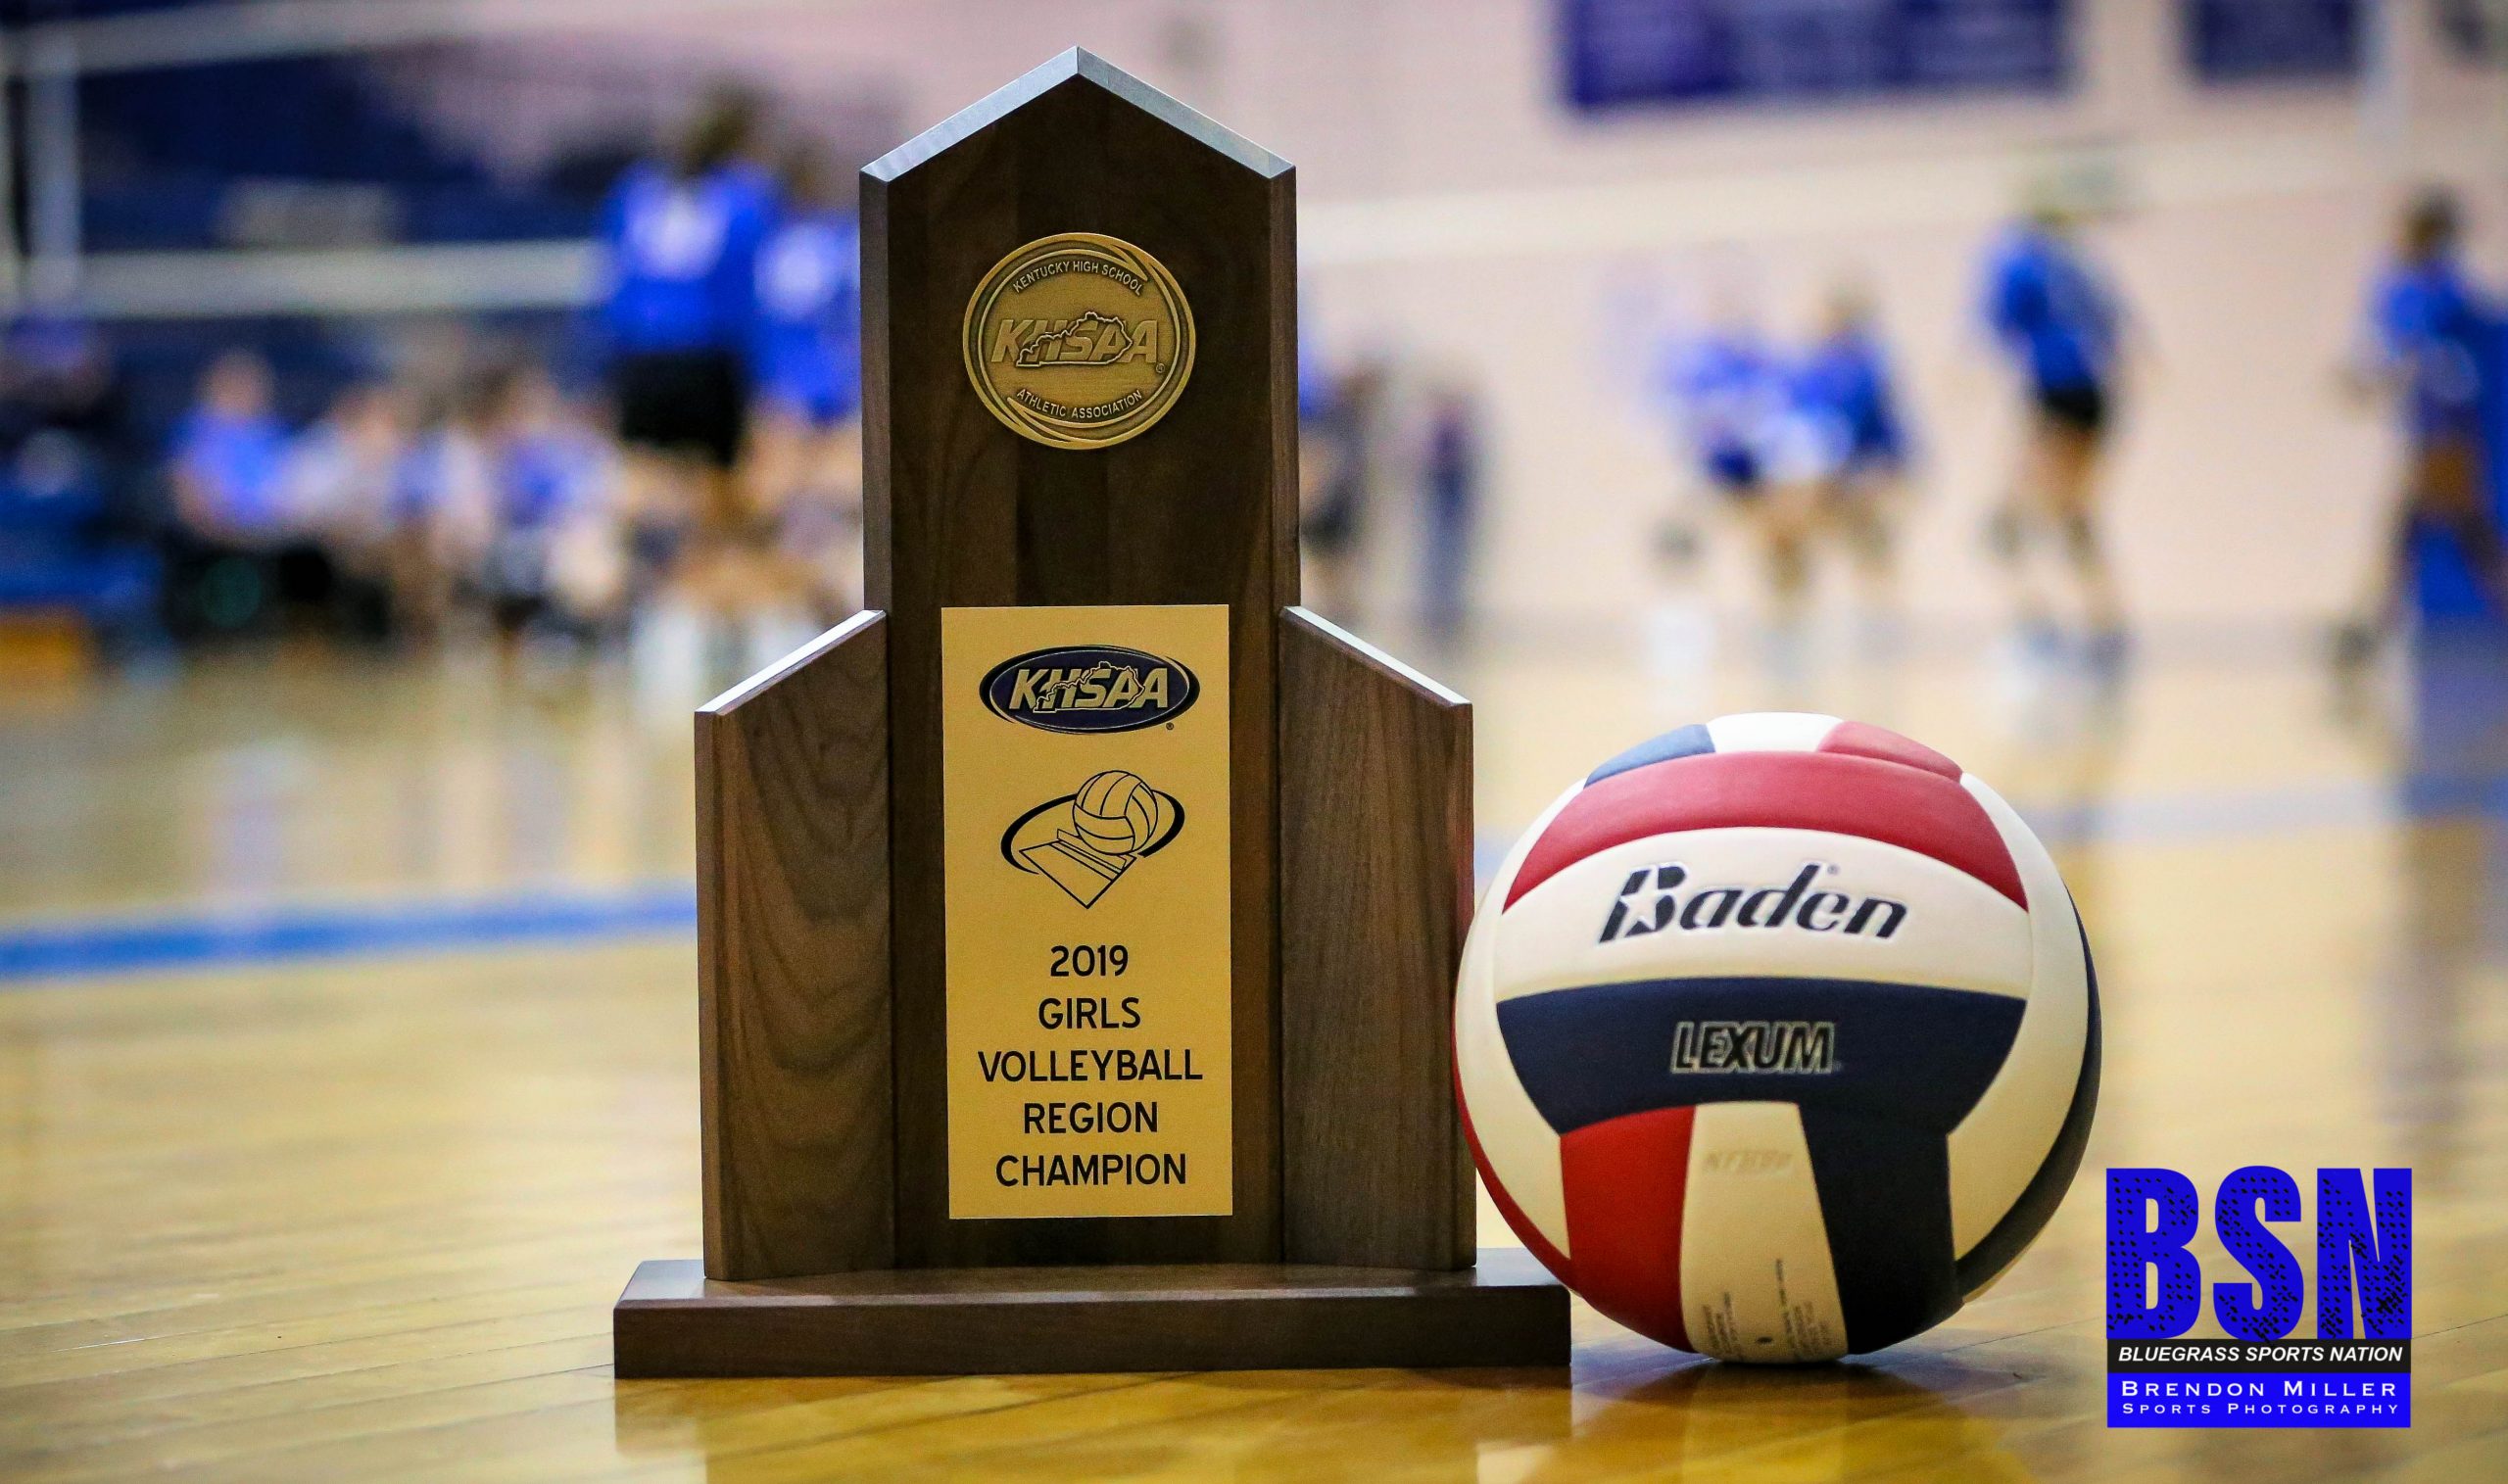 55th District Volleyball Championship LIVE Tonight on BSN!